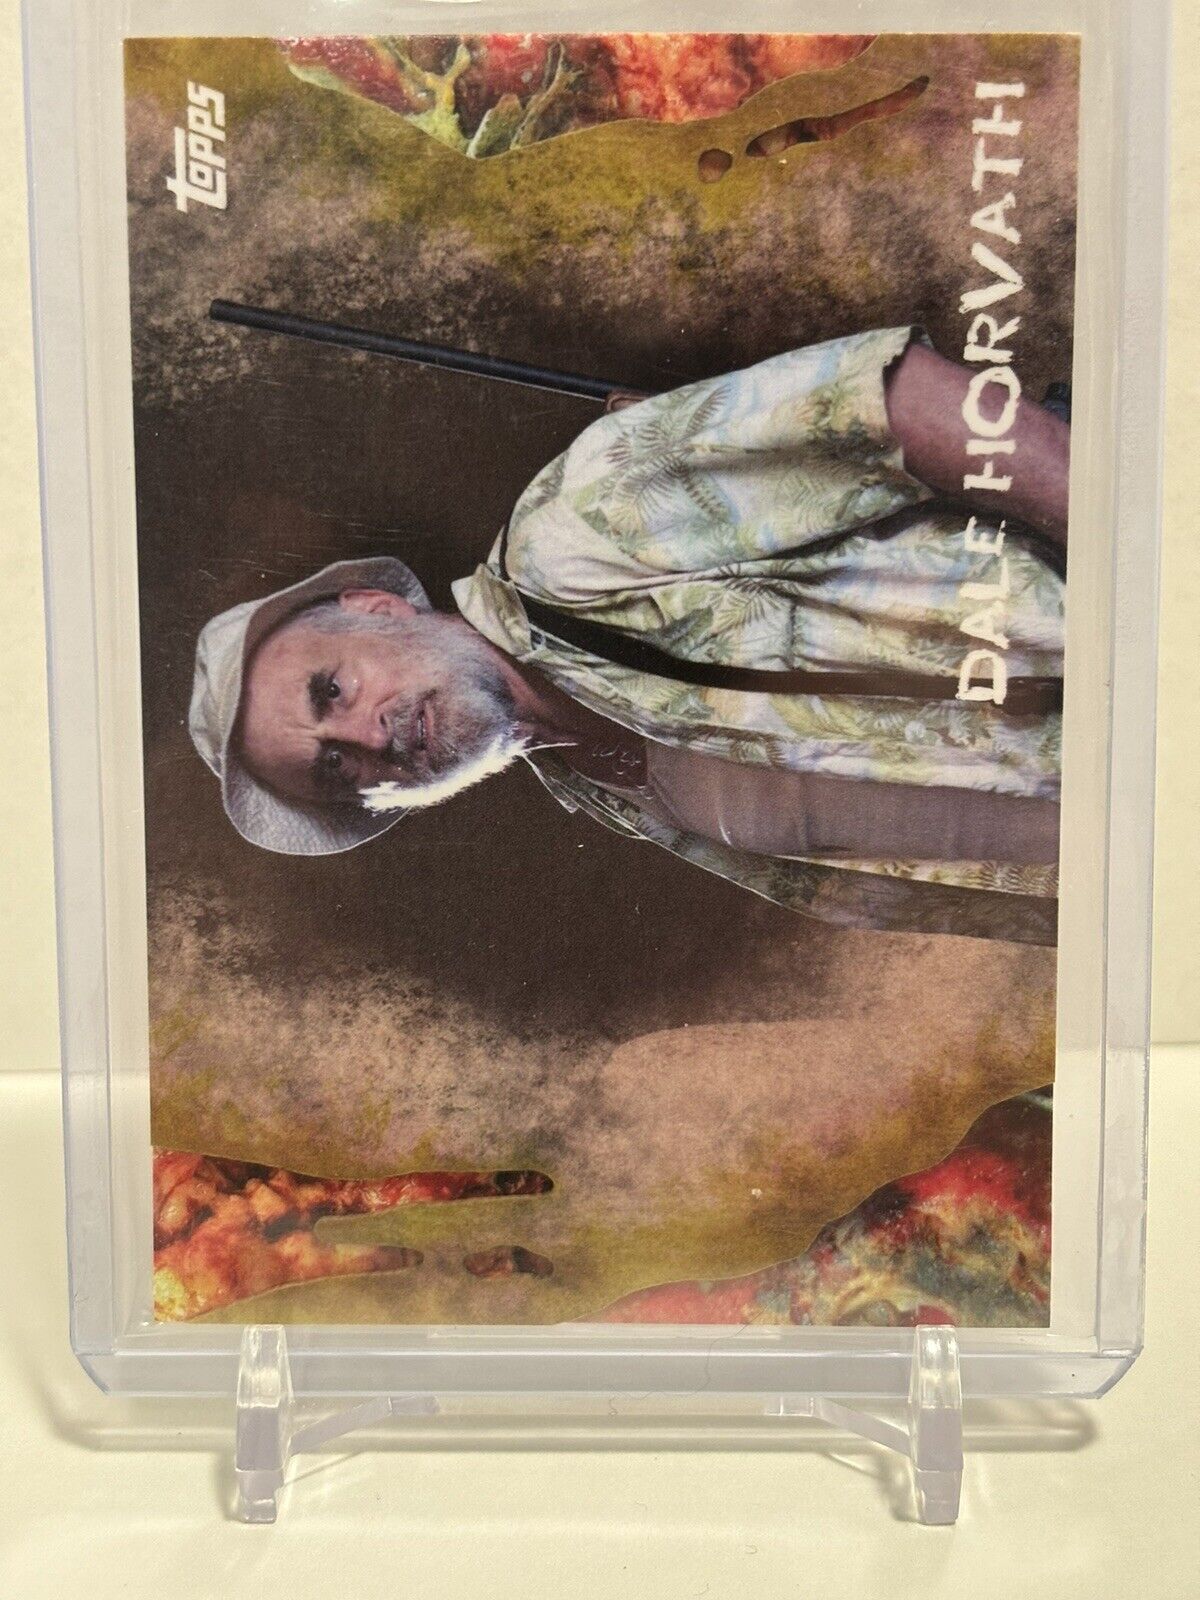 2016 Topps The Walking Dead Survival Box Infected /99 Dale Horvath #10